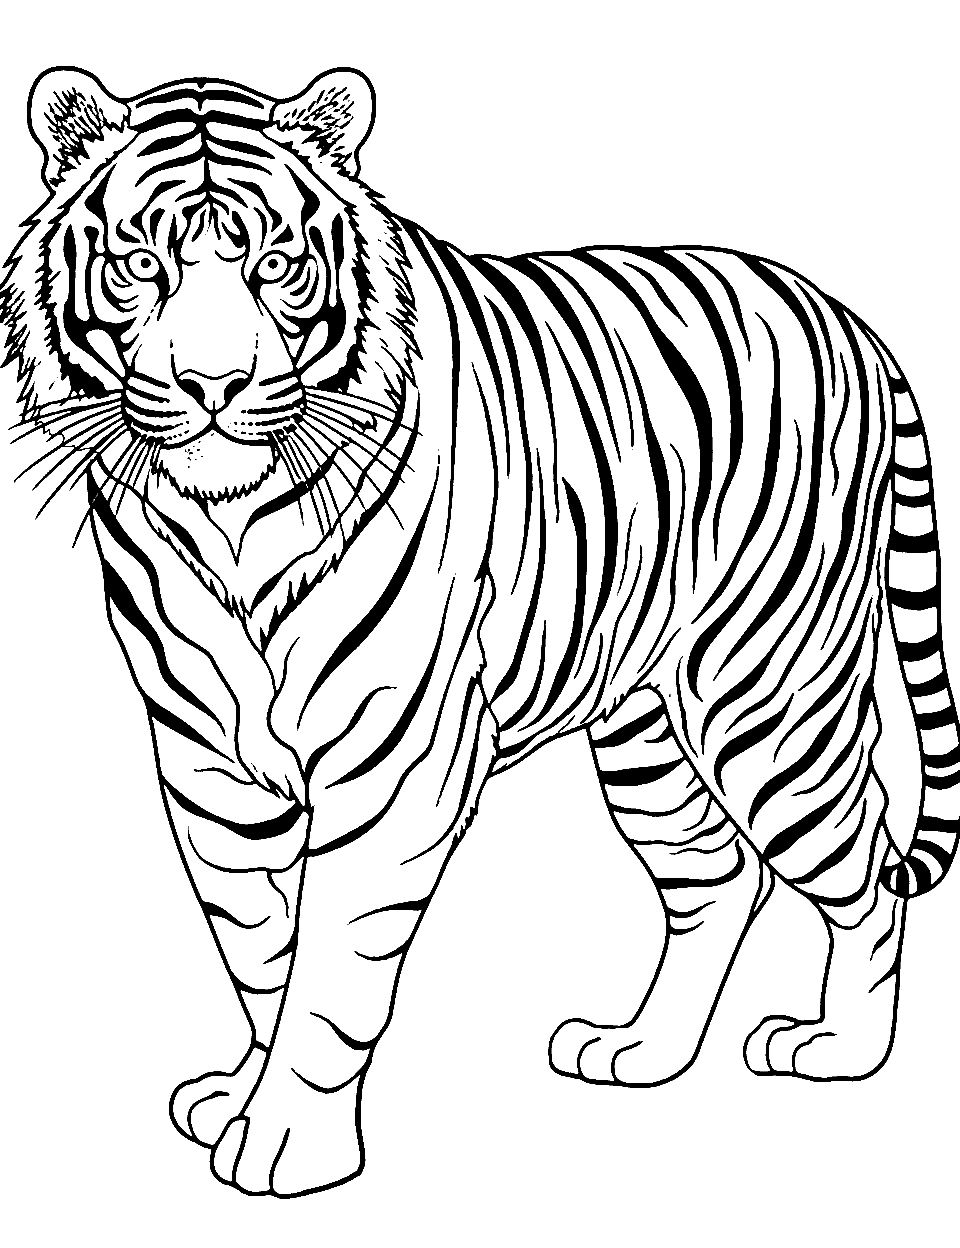 Tiger coloring pages free printable sheets